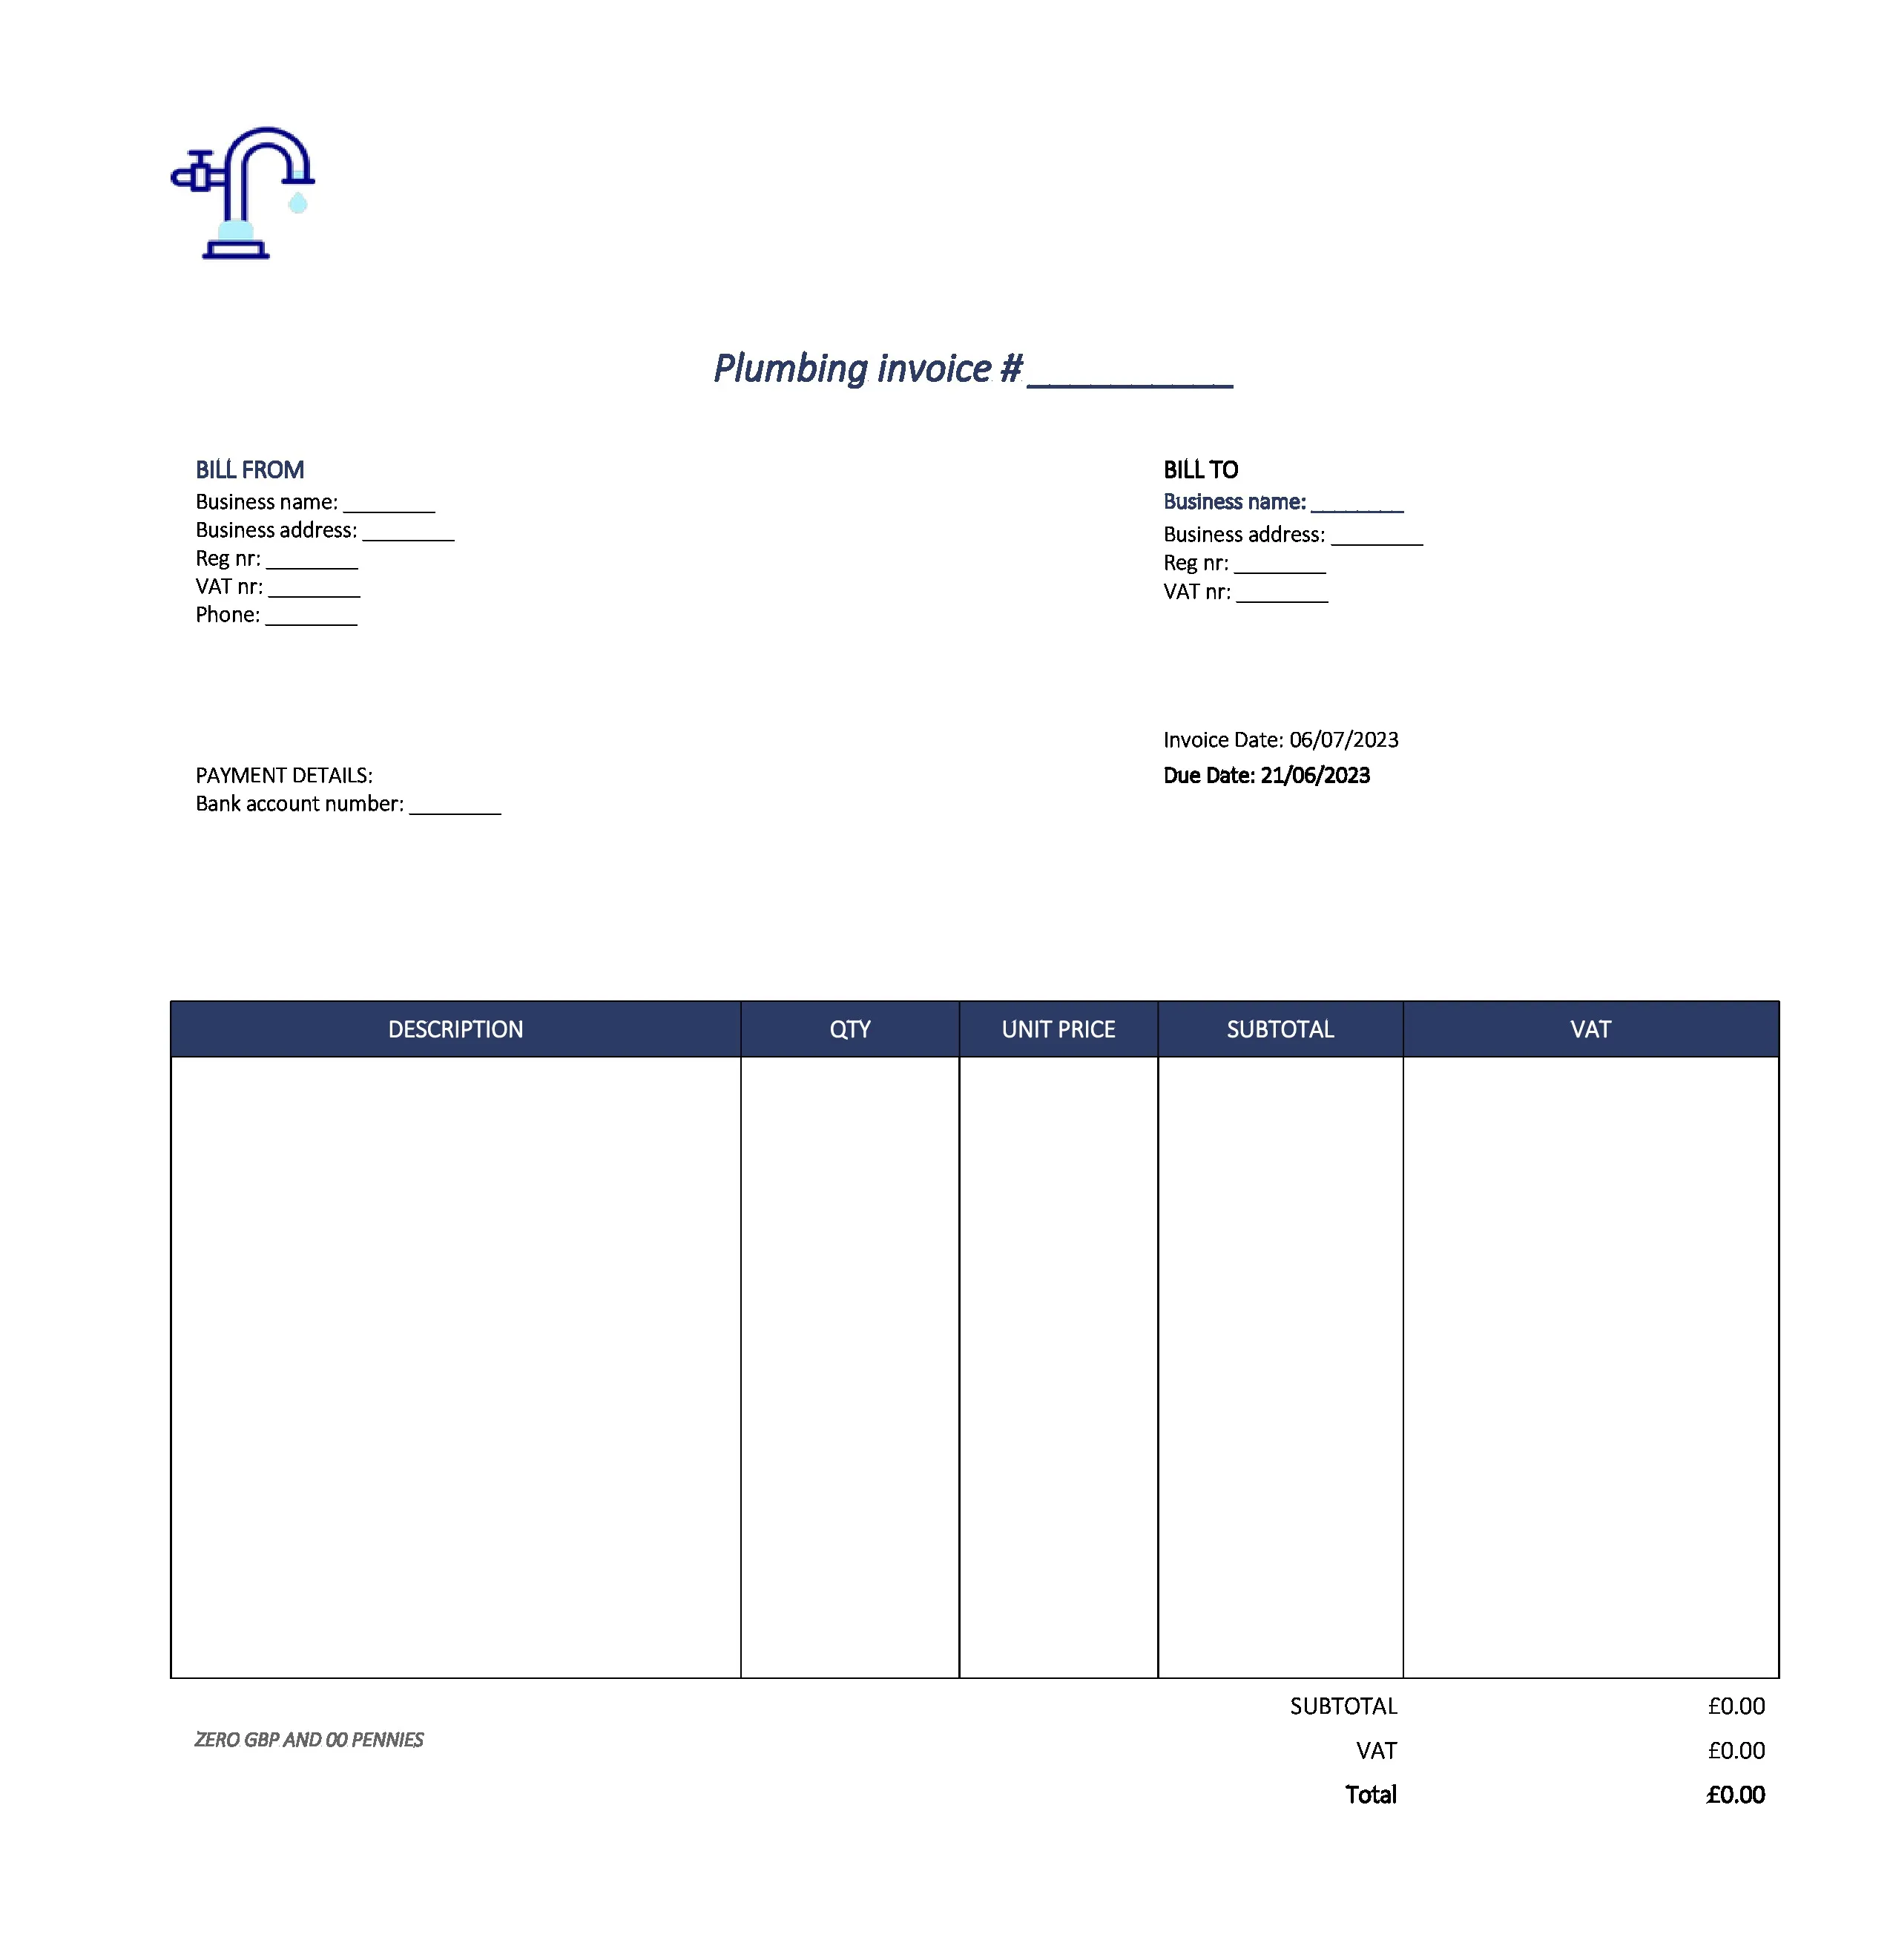 detailed plumbing invoice template UK Excel / Google sheets